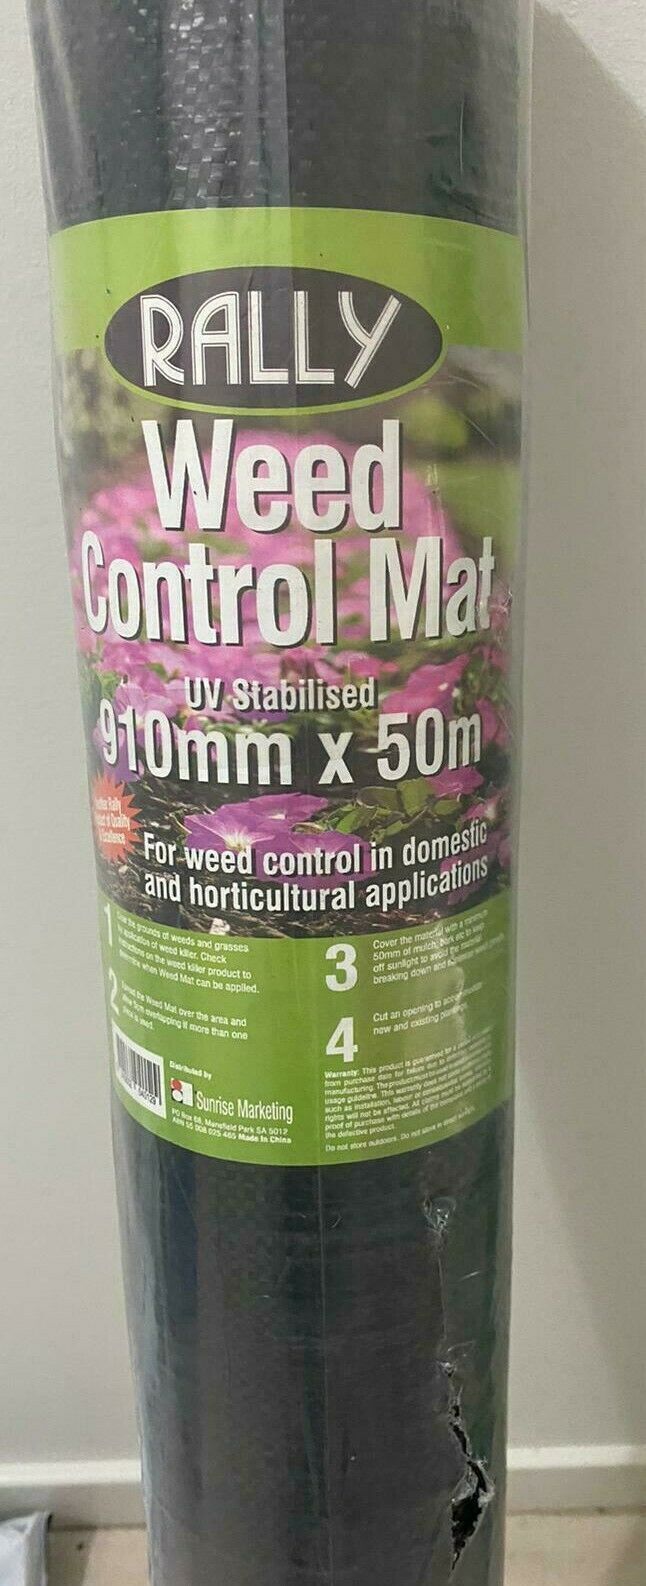 RALLY WEED CONTROL MAT 910MM X 50M